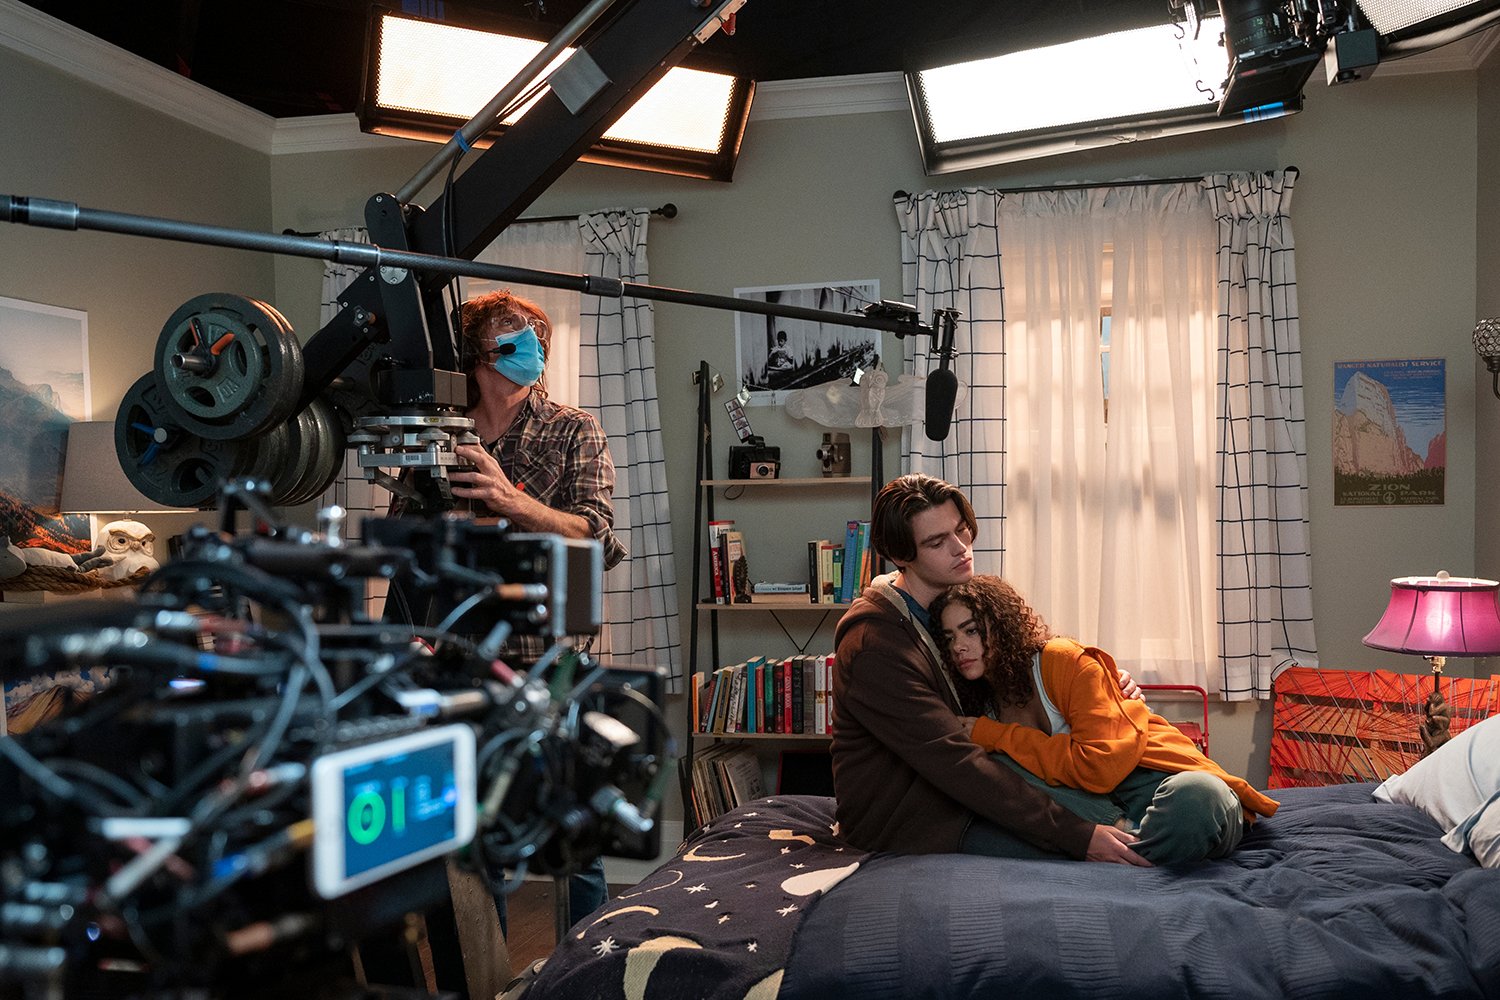 Ginny & Georgia behind-the-scenes photo shows cameras pointed at Felix Mallard and Antonia Gentry snuggling on a bed